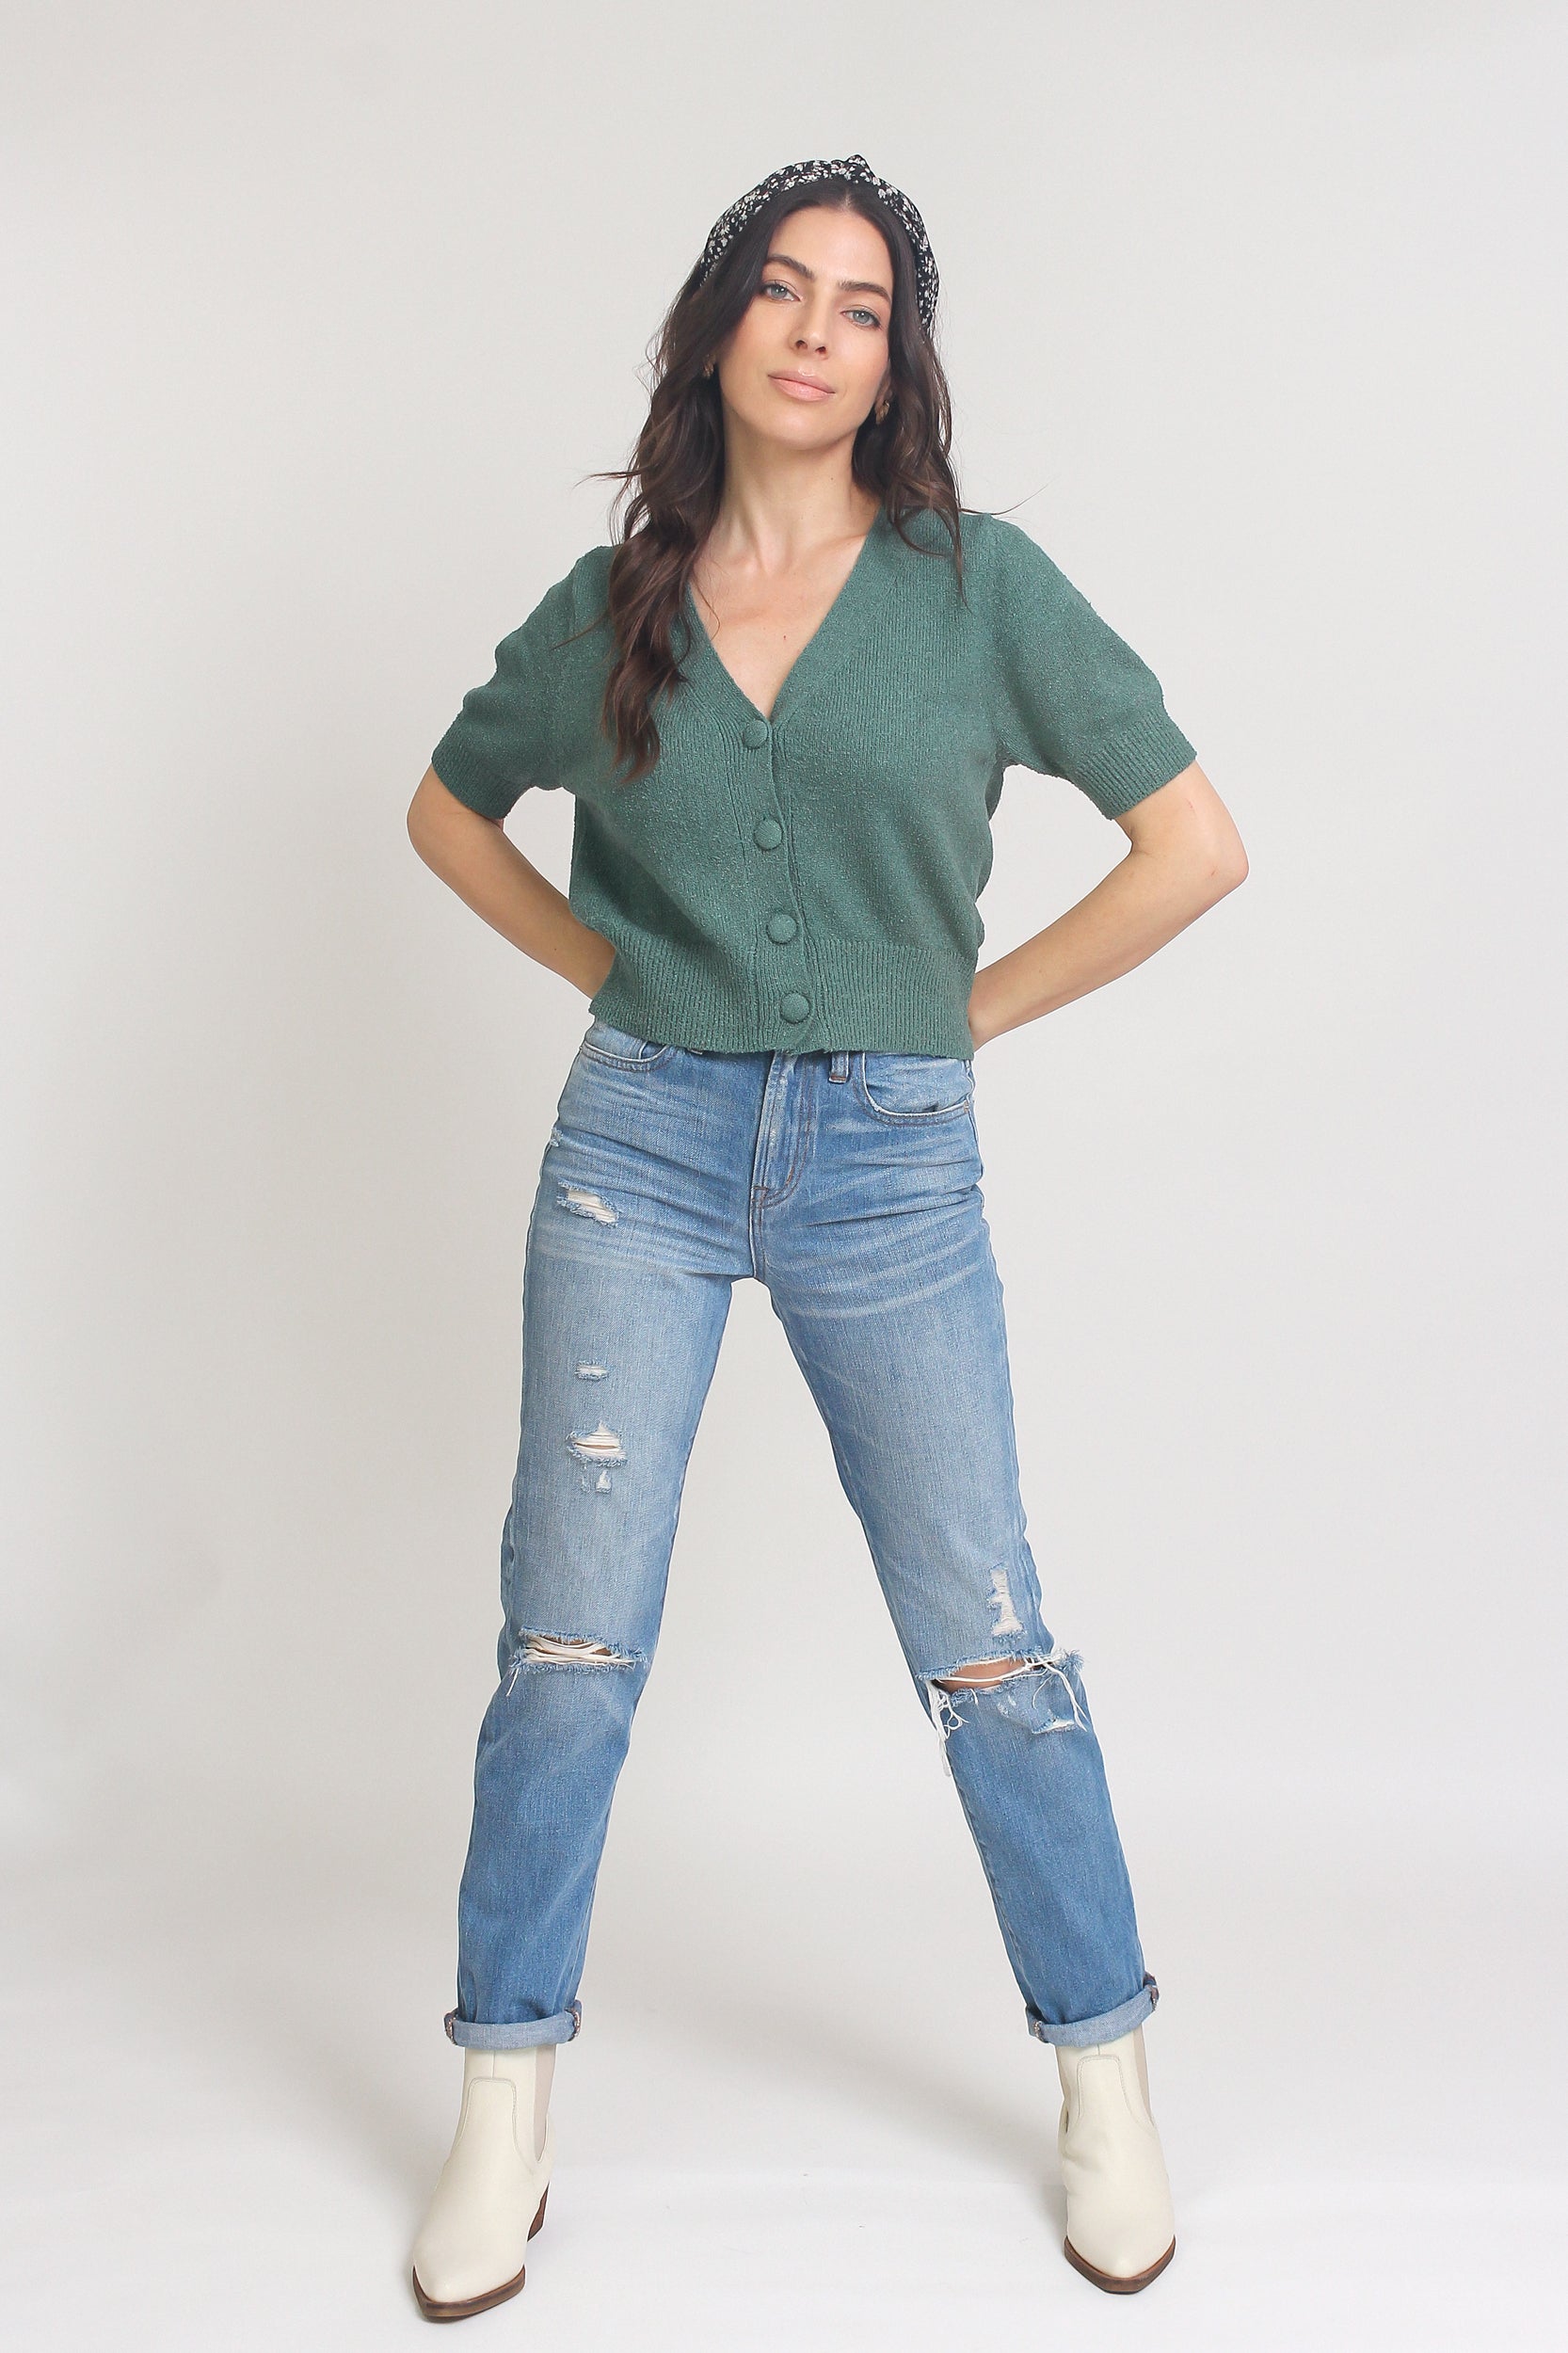 Short sleeve button front cropped cardigan, in Teal. Image 13